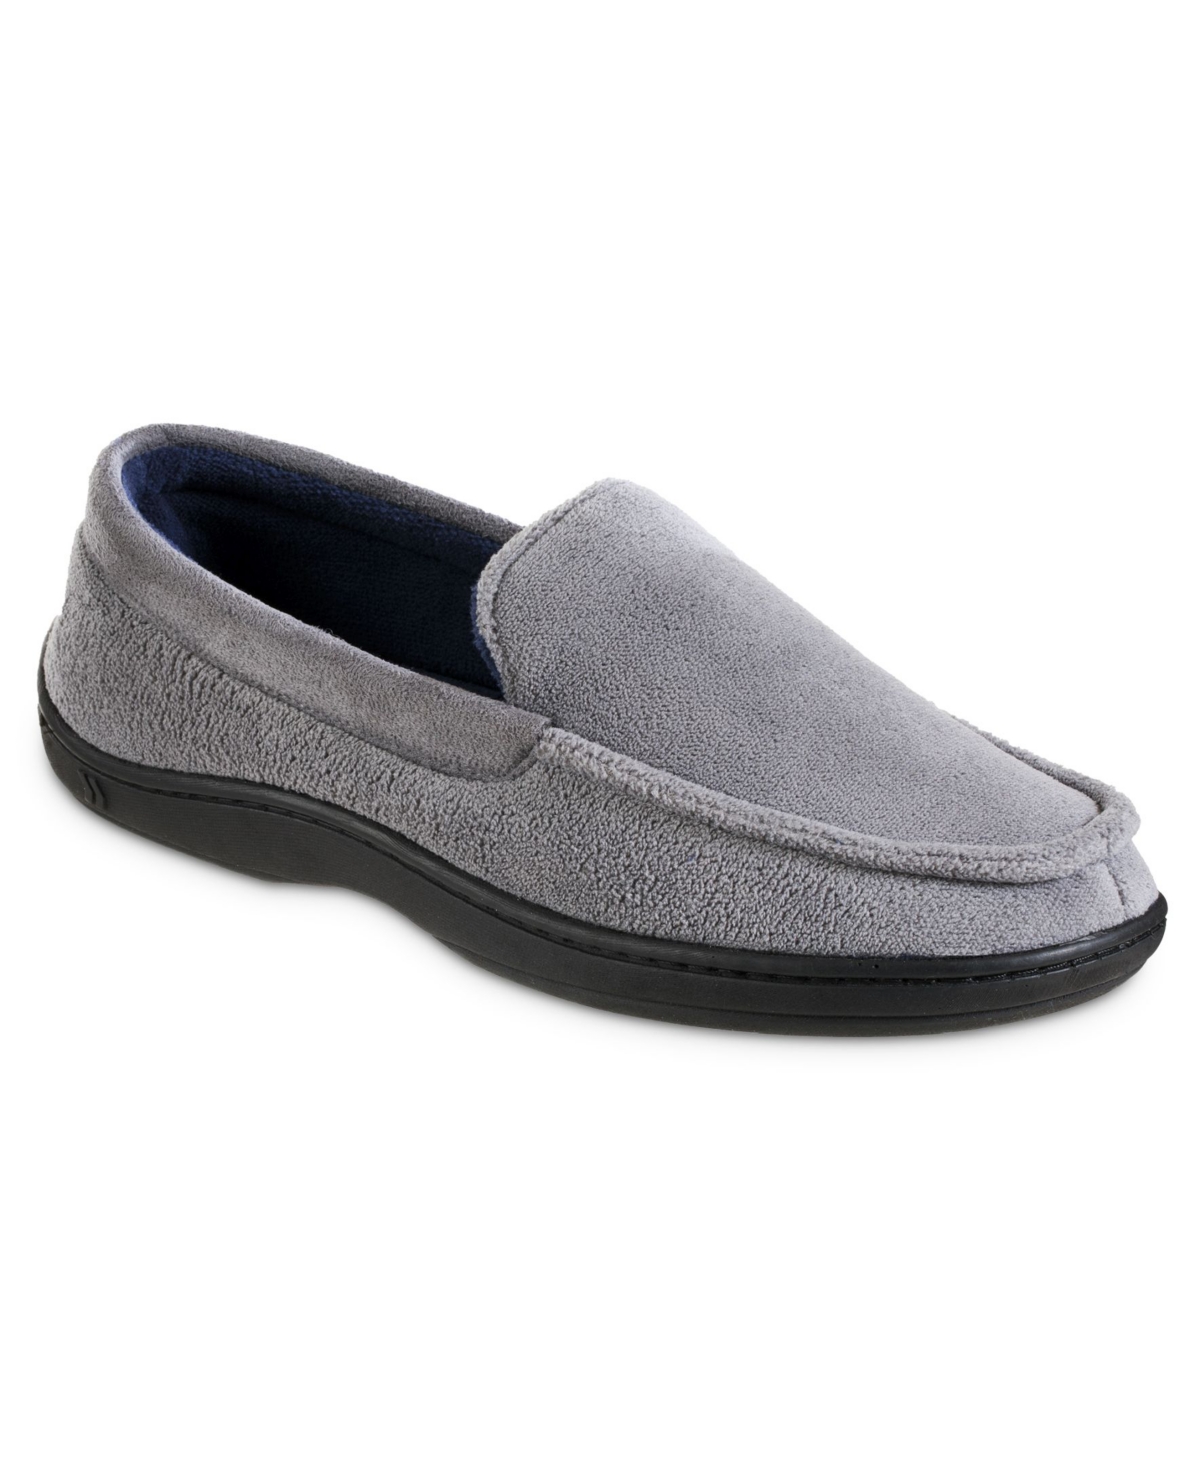 Men's Microterry Jared Moccasin Slippers - Ash